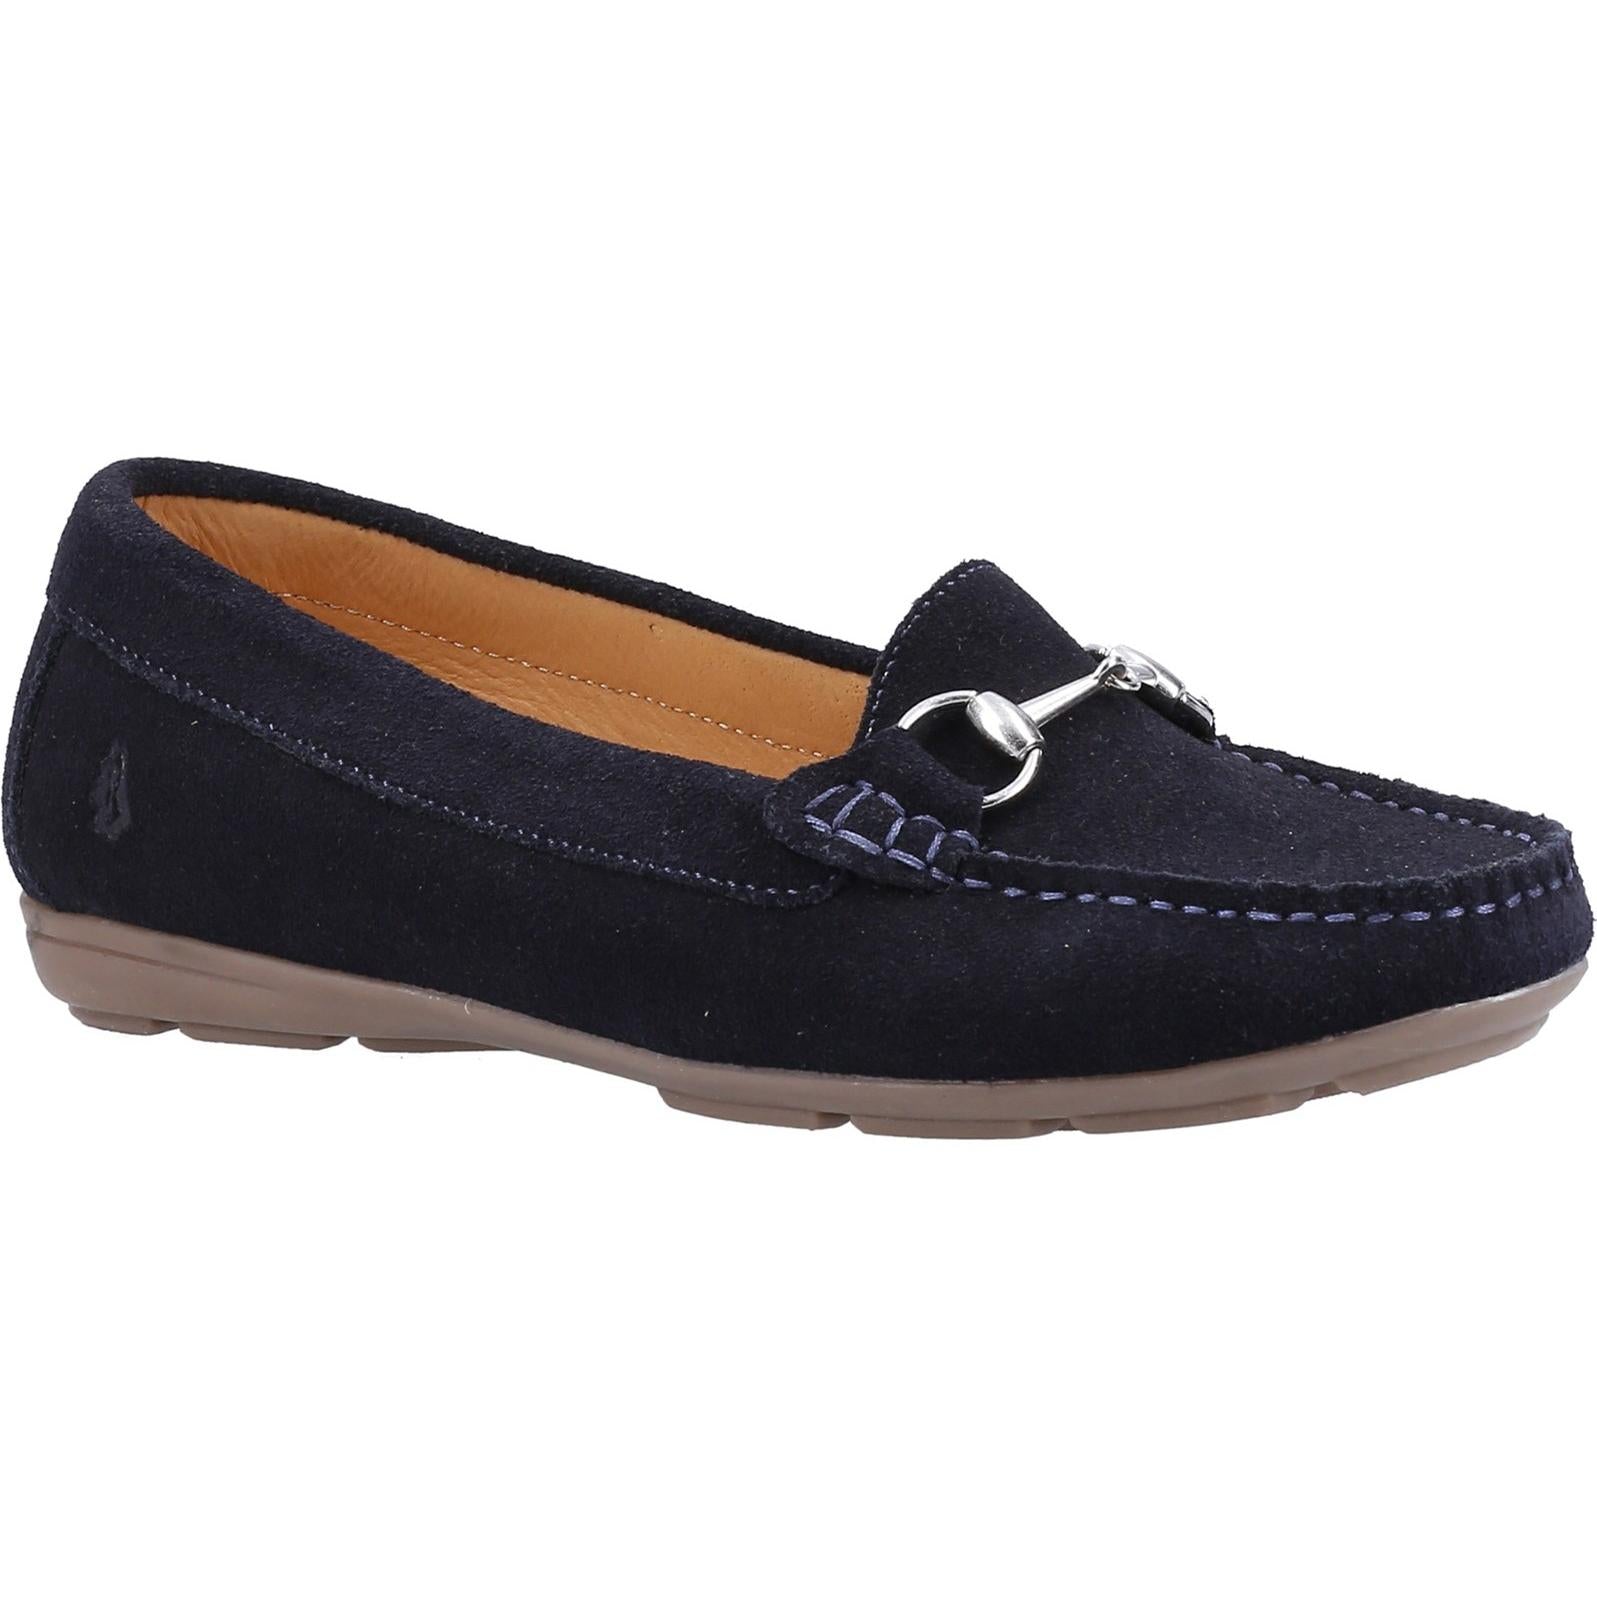 Hush Puppies Molly Snaffle Loafer Shoe